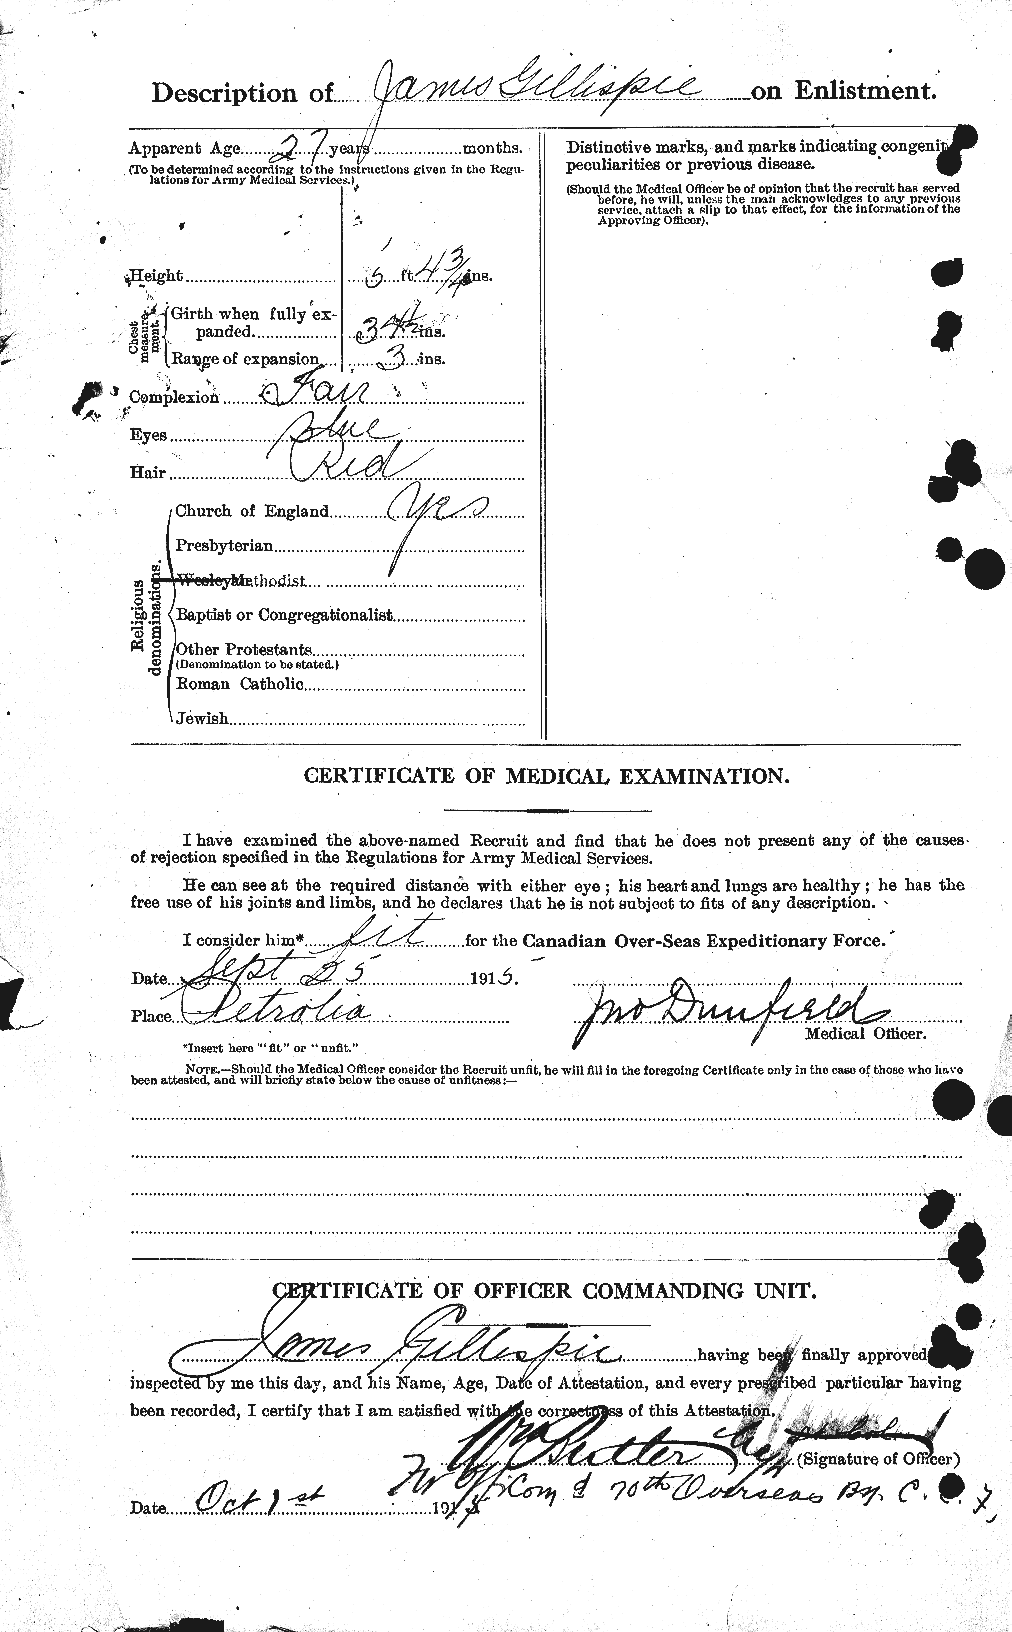 Personnel Records of the First World War - CEF 348796b